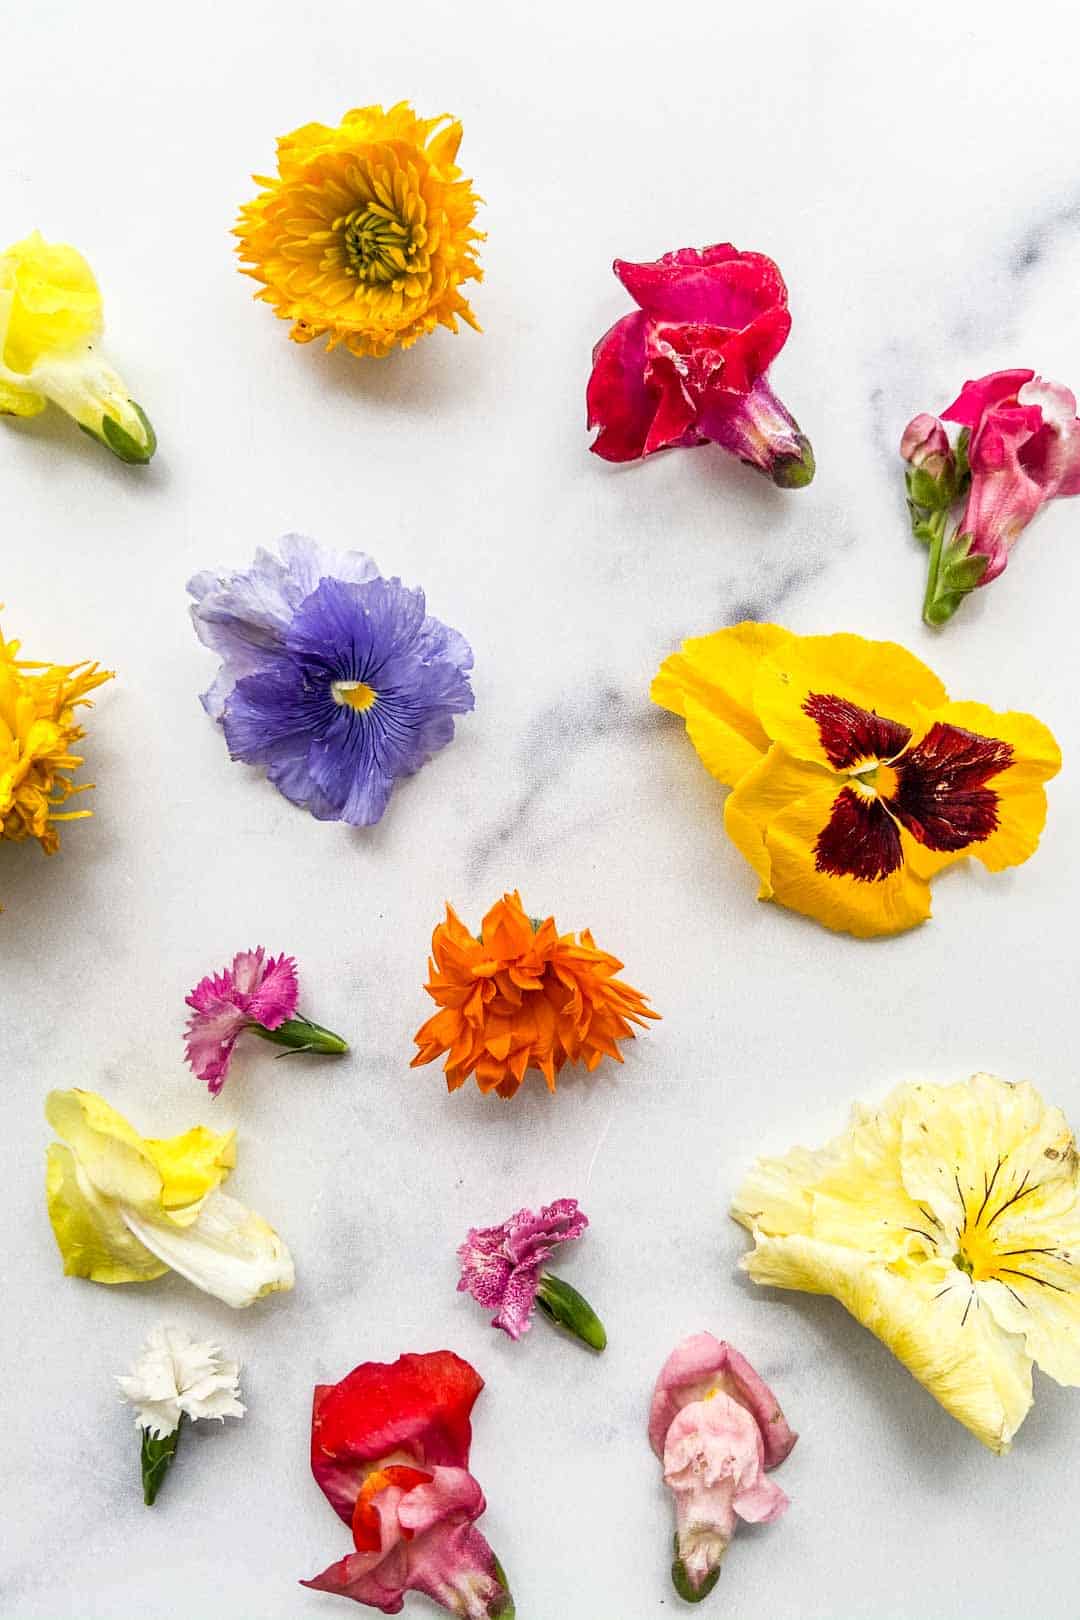 5 Tested Steps for Keeping Your Flowers Fresh Without a Cooler